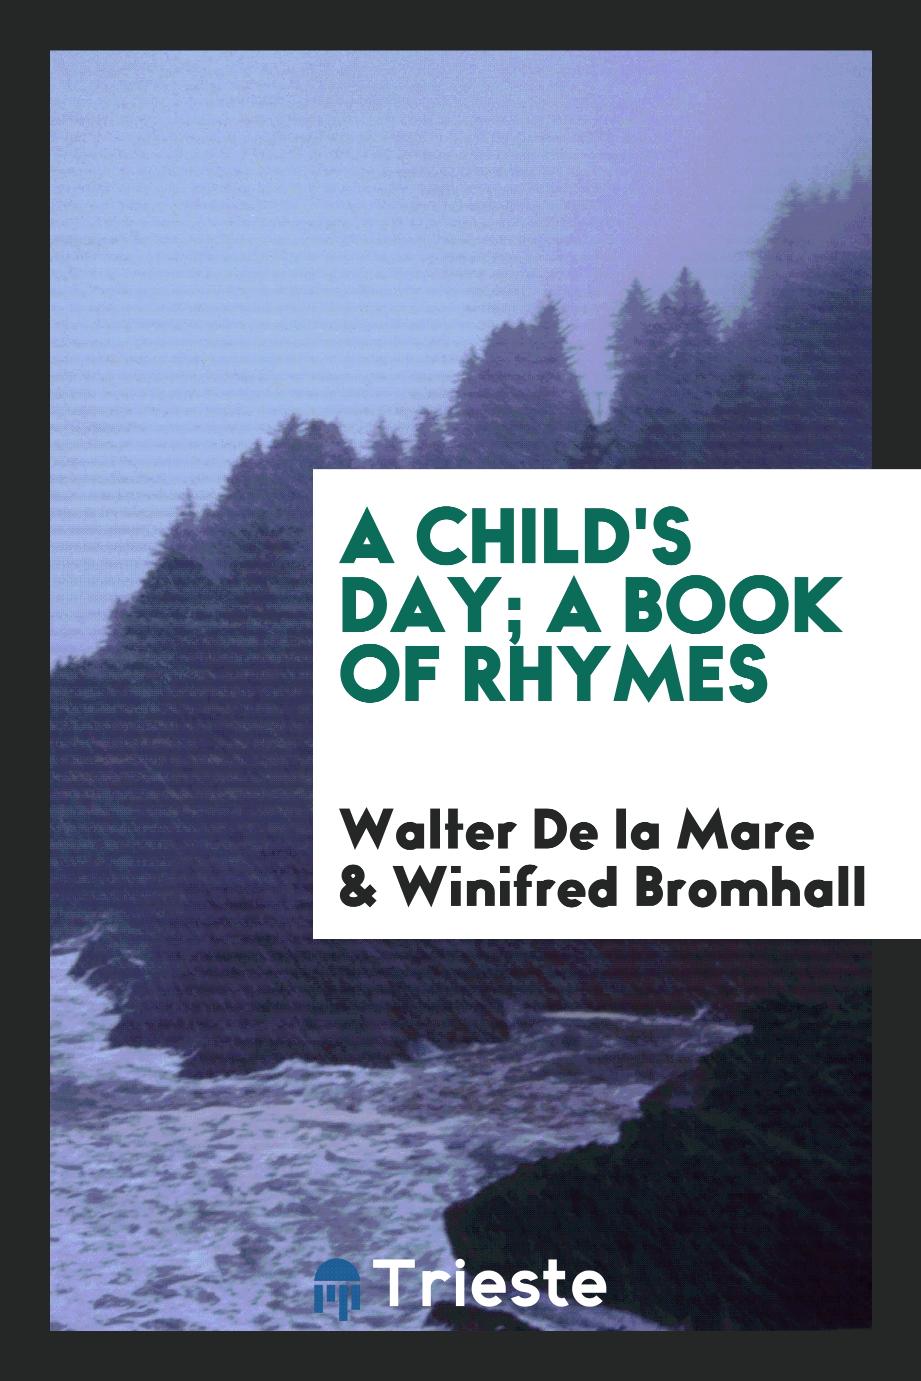 Walter De la Mare, Winifred Bromhall - A child's day; a book of rhymes